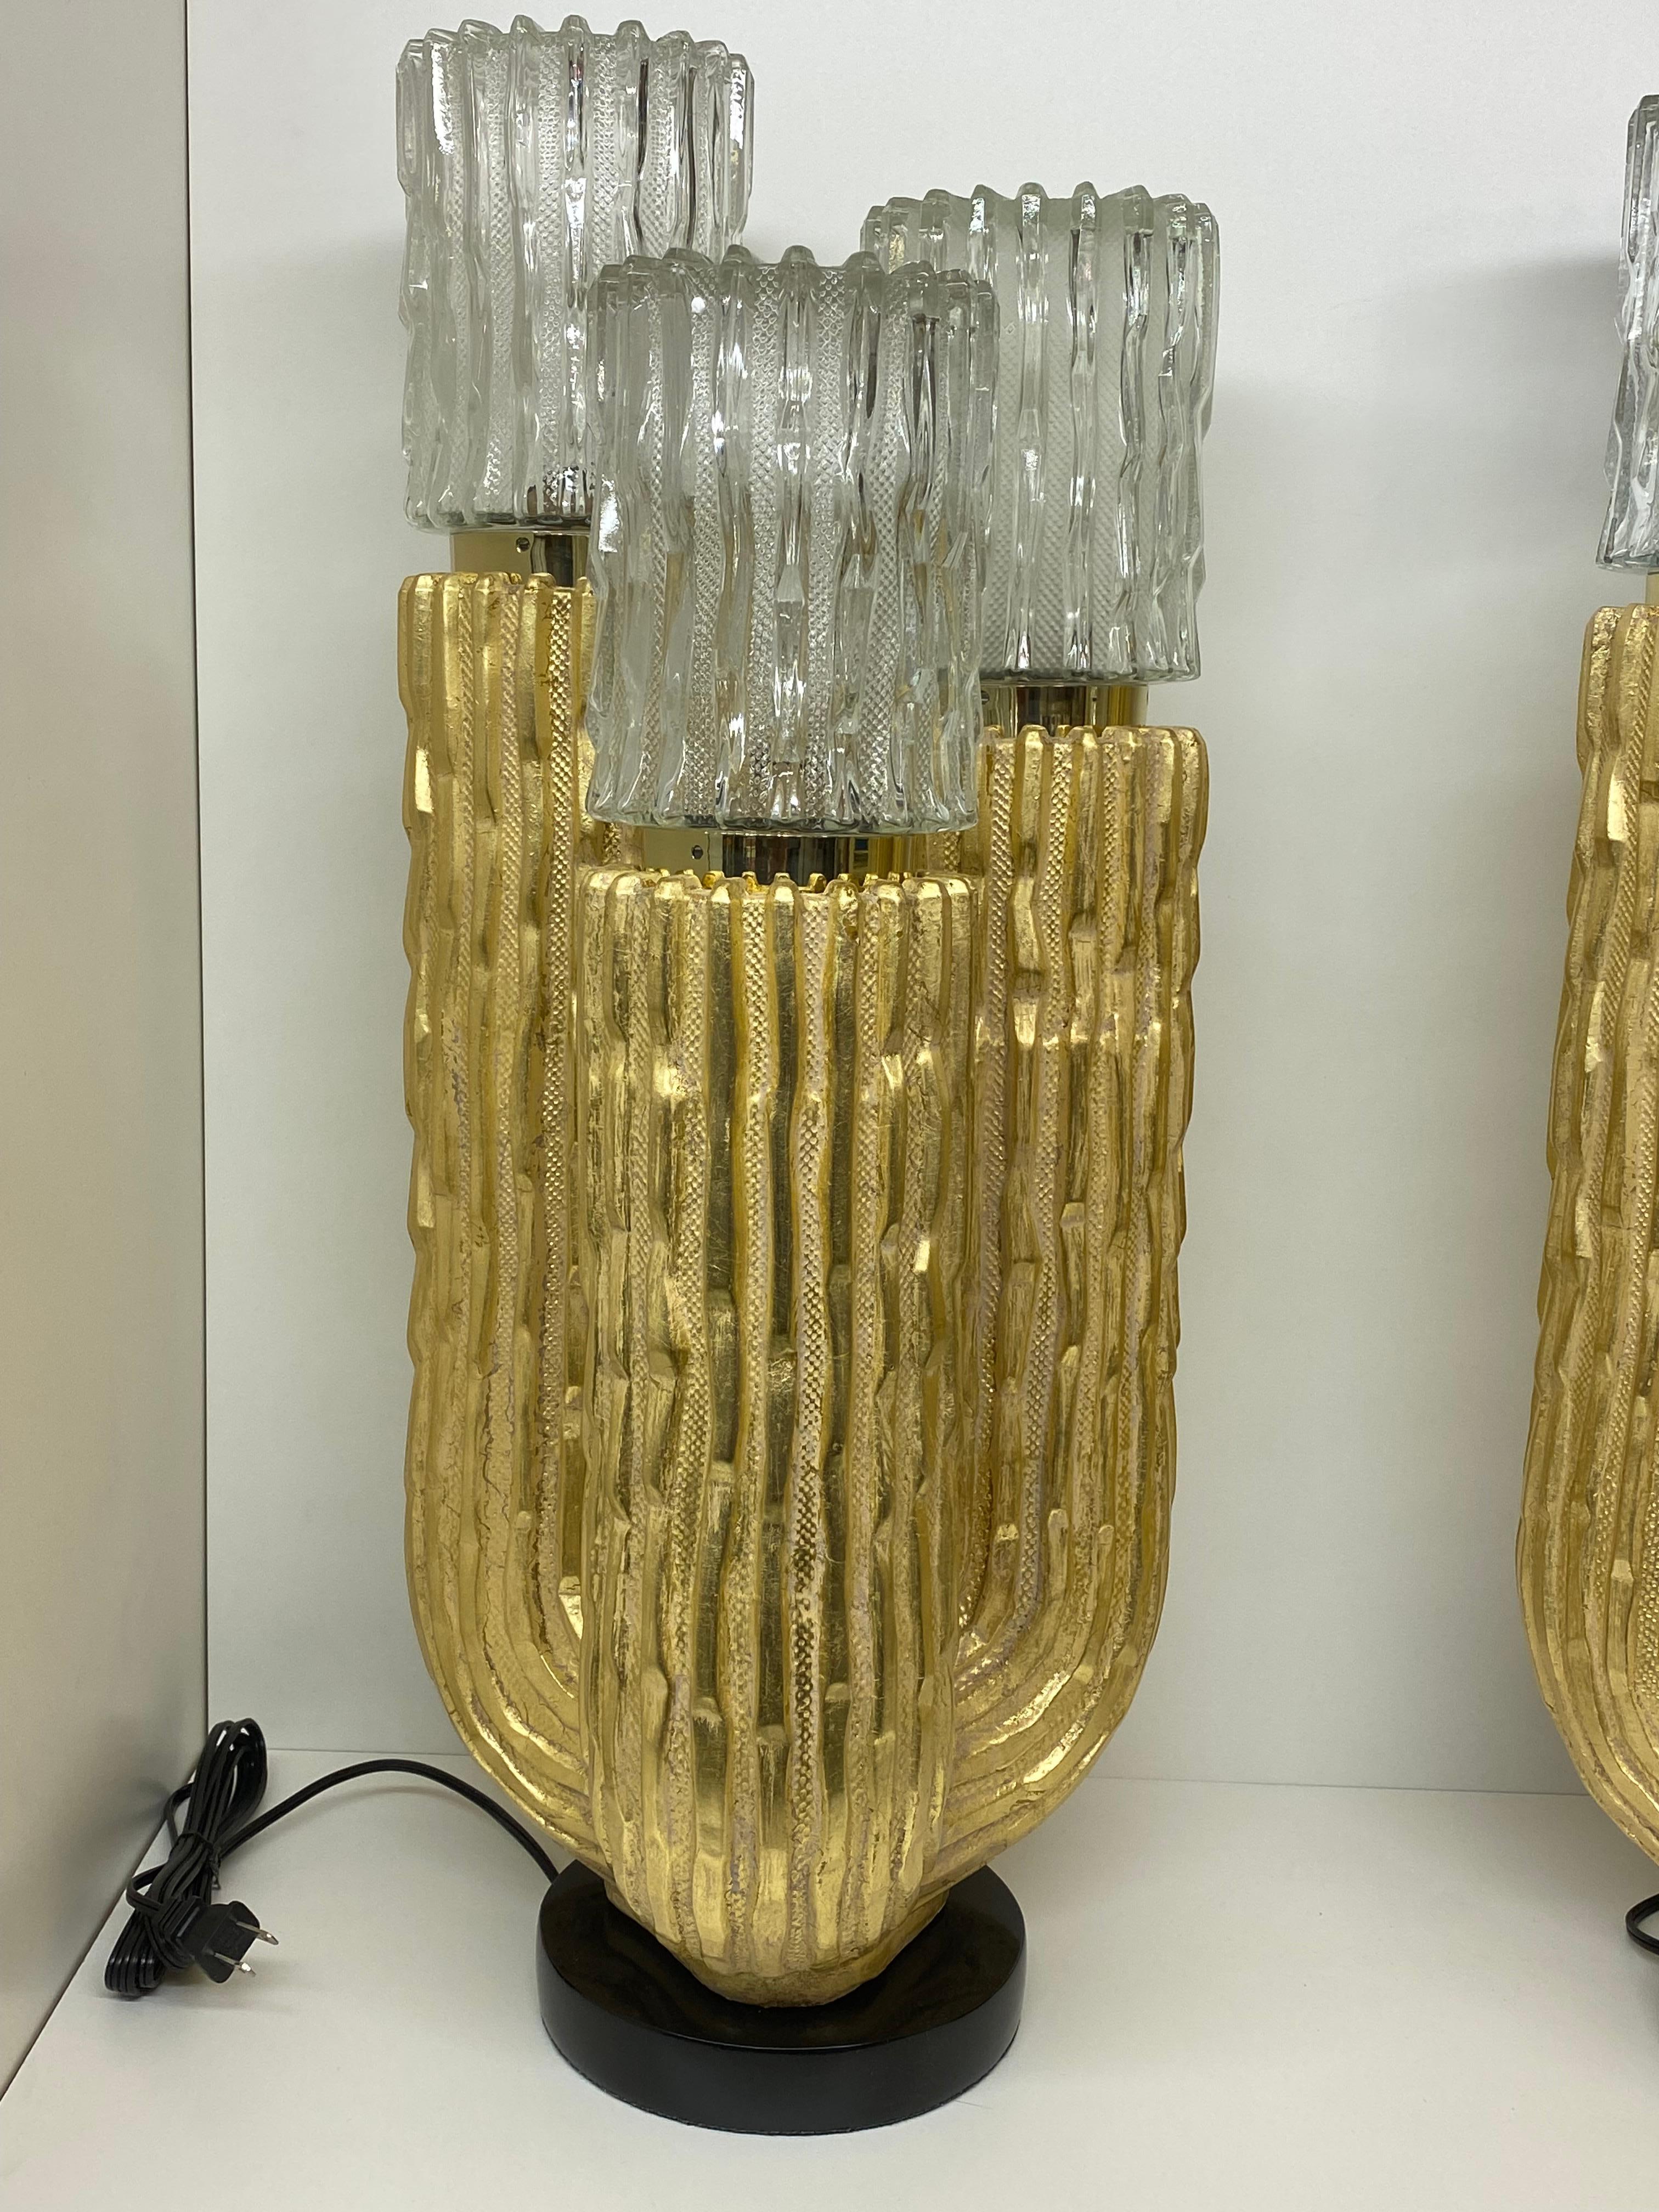 Pair of gold leafed plaster cactus lamps with glass shades by Fuggiti Studios.